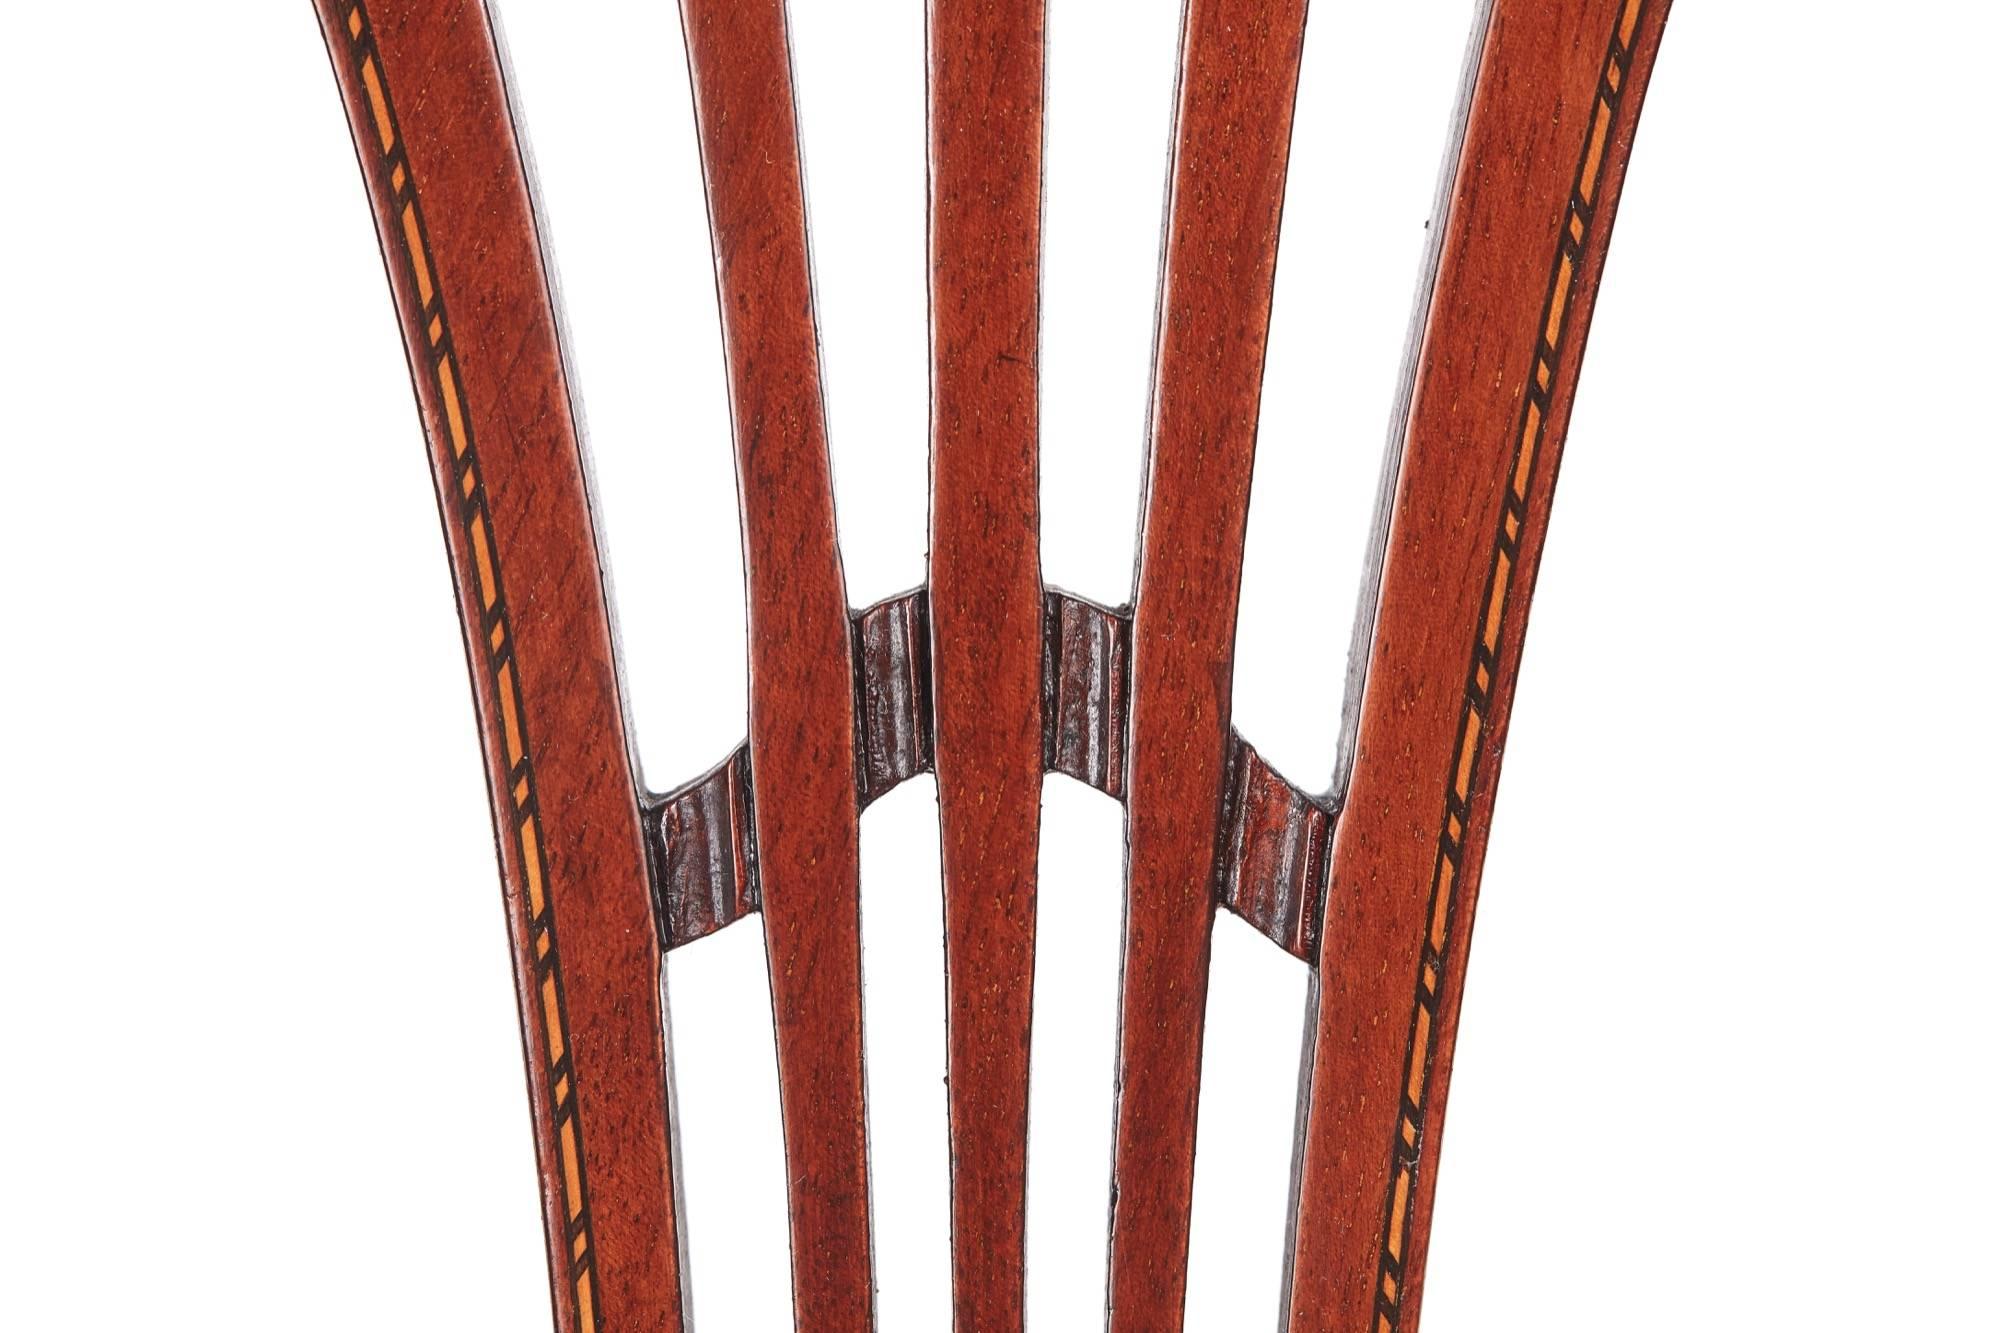 Pair of mahogany inlaid side chairs,with a lovely shaped back, inlaid top rail, pierced splat to the centre, supported by cabriole legs to the front outswept back legs
Lovely color and condition
Measures: 18